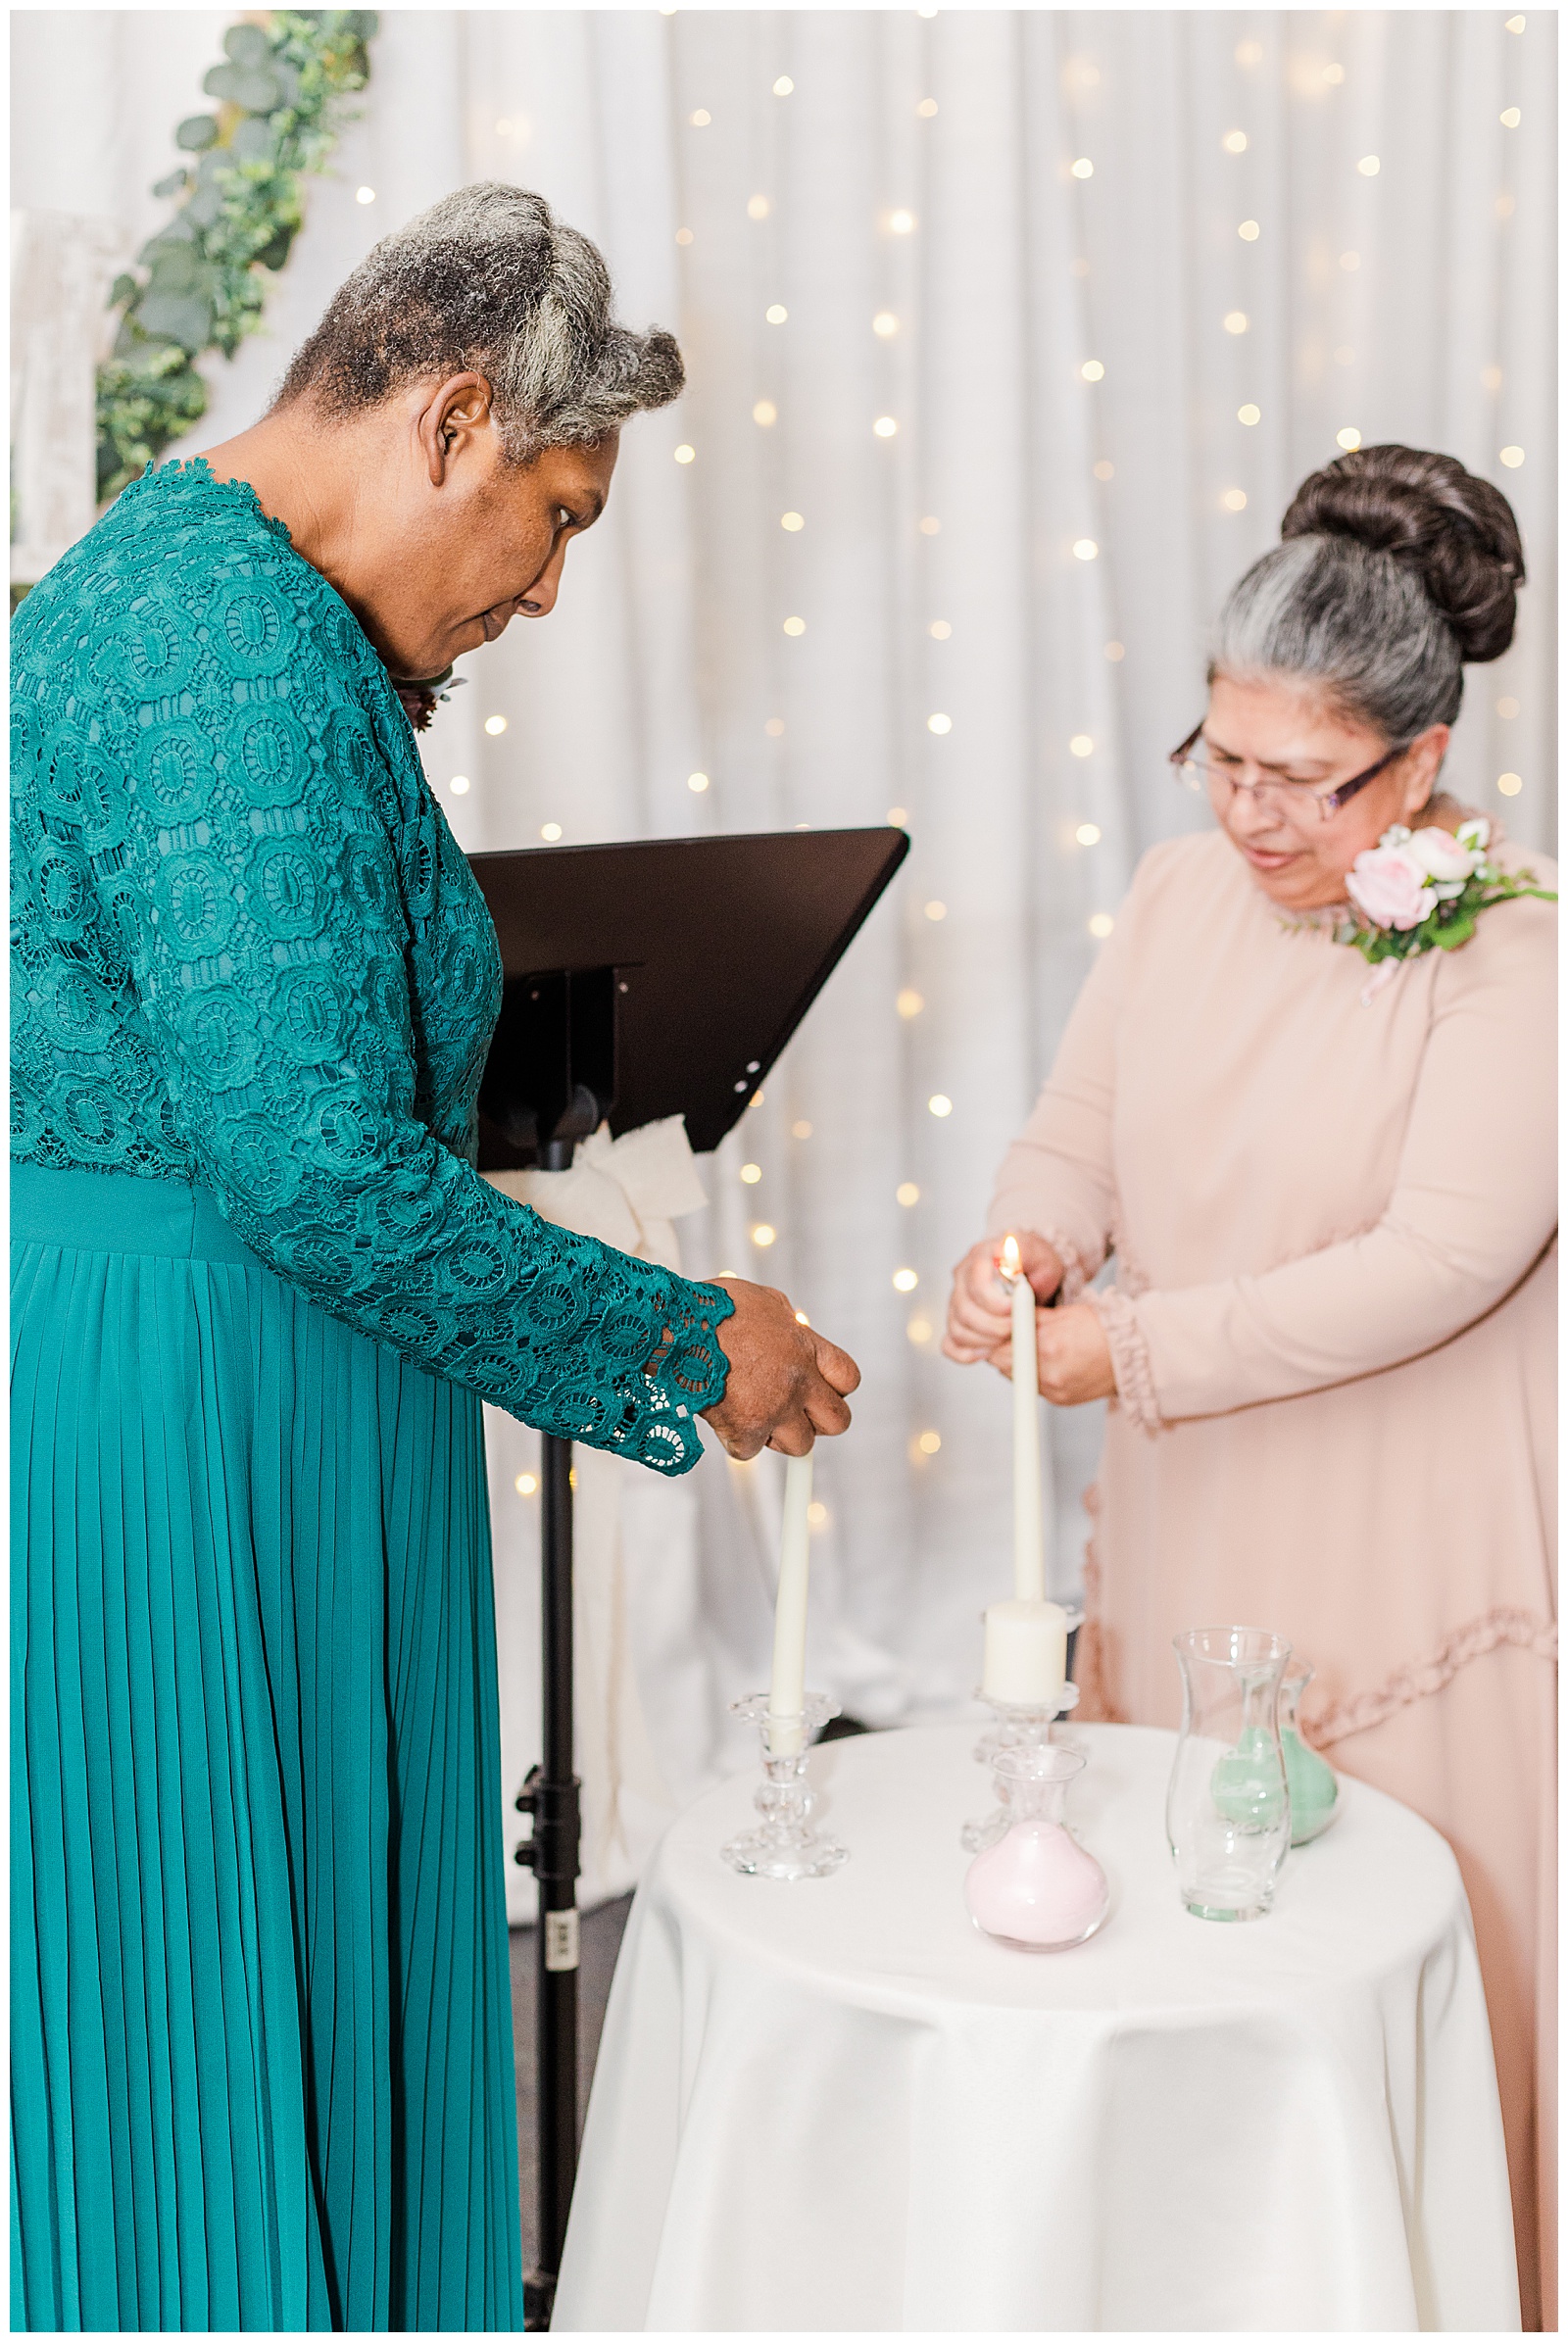 Mother of bride and mother of groom lighting unity candles